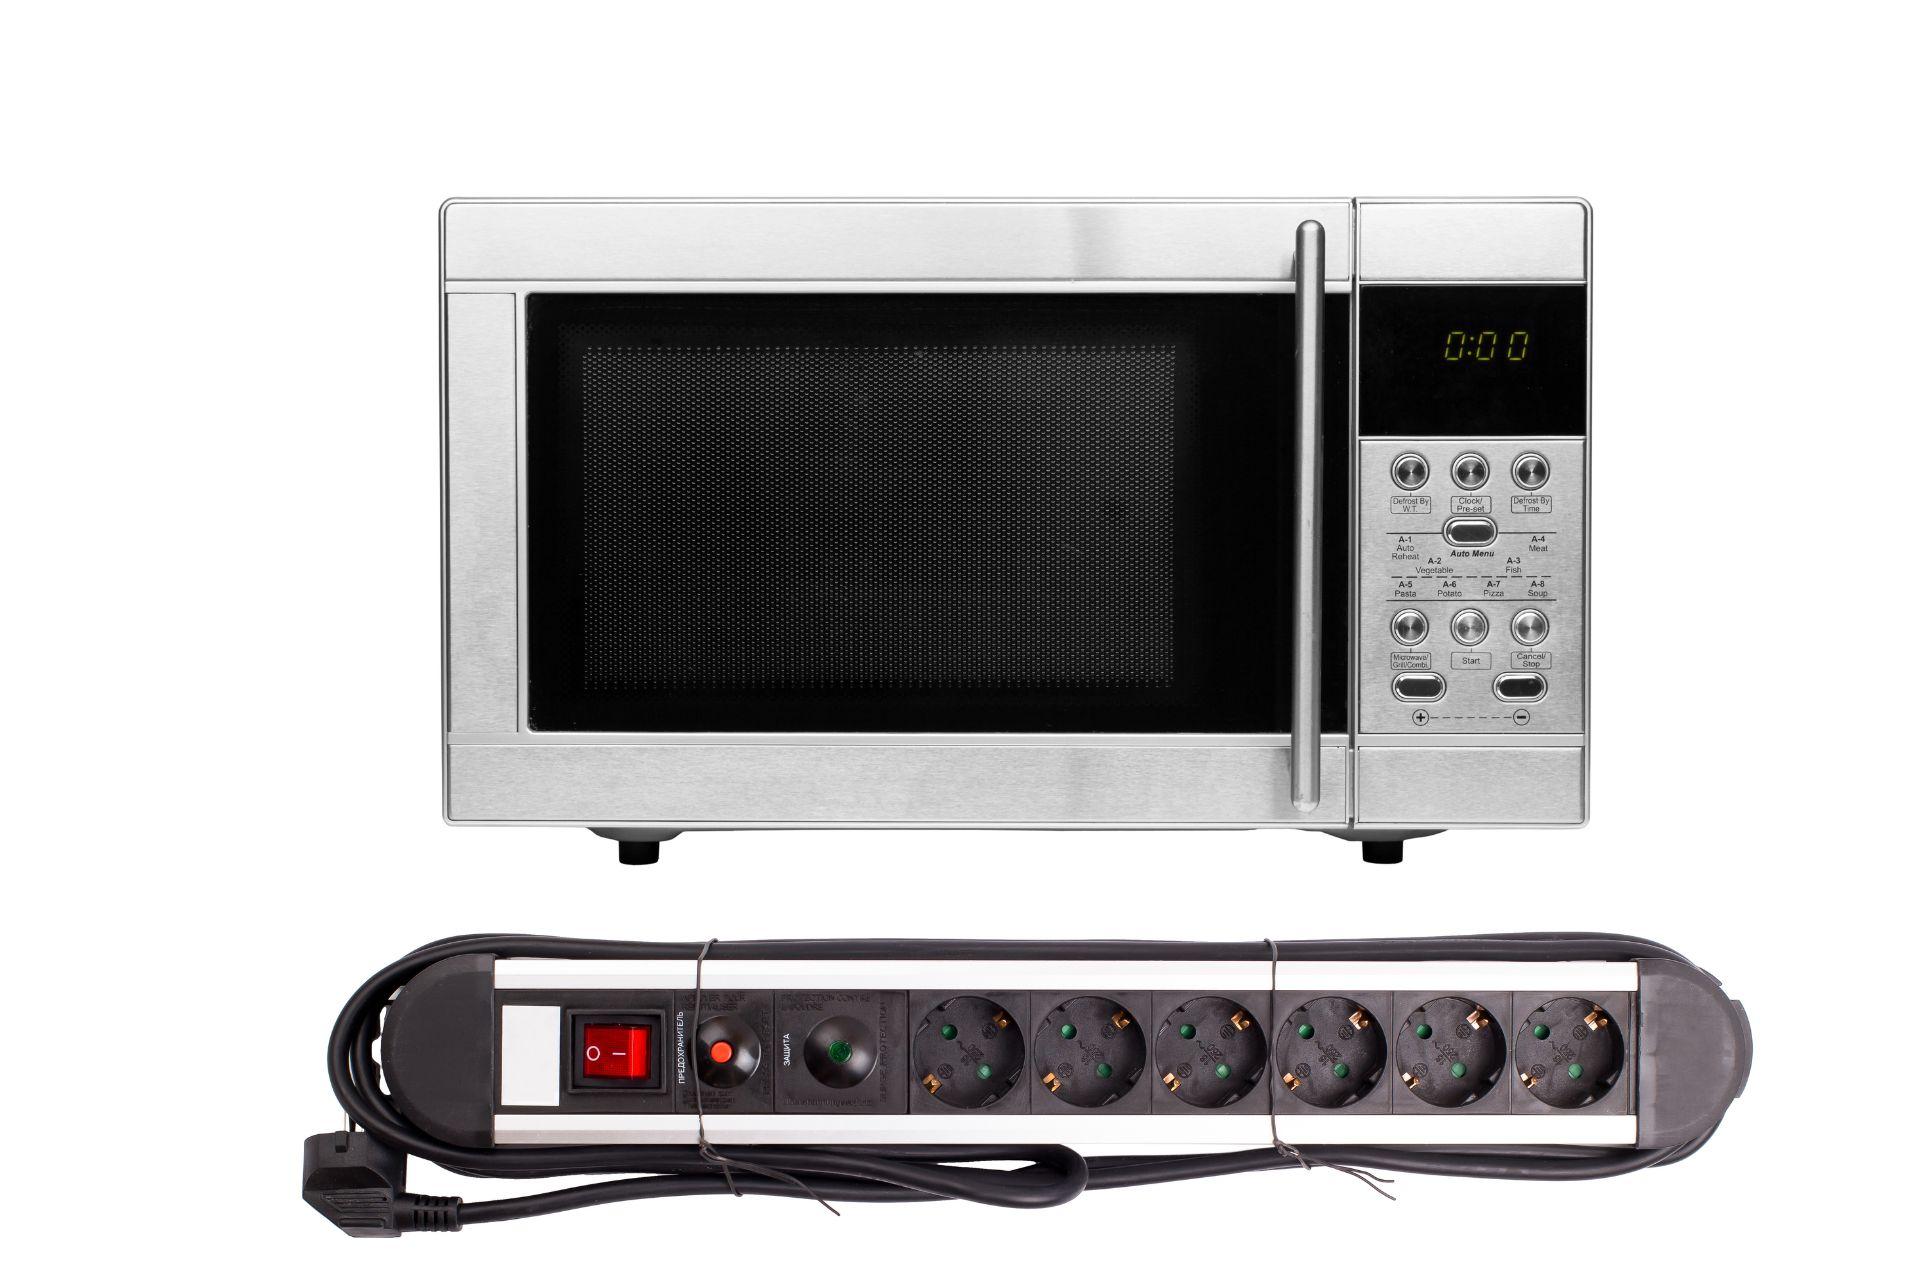 can a microwave be plugged into a surge protector